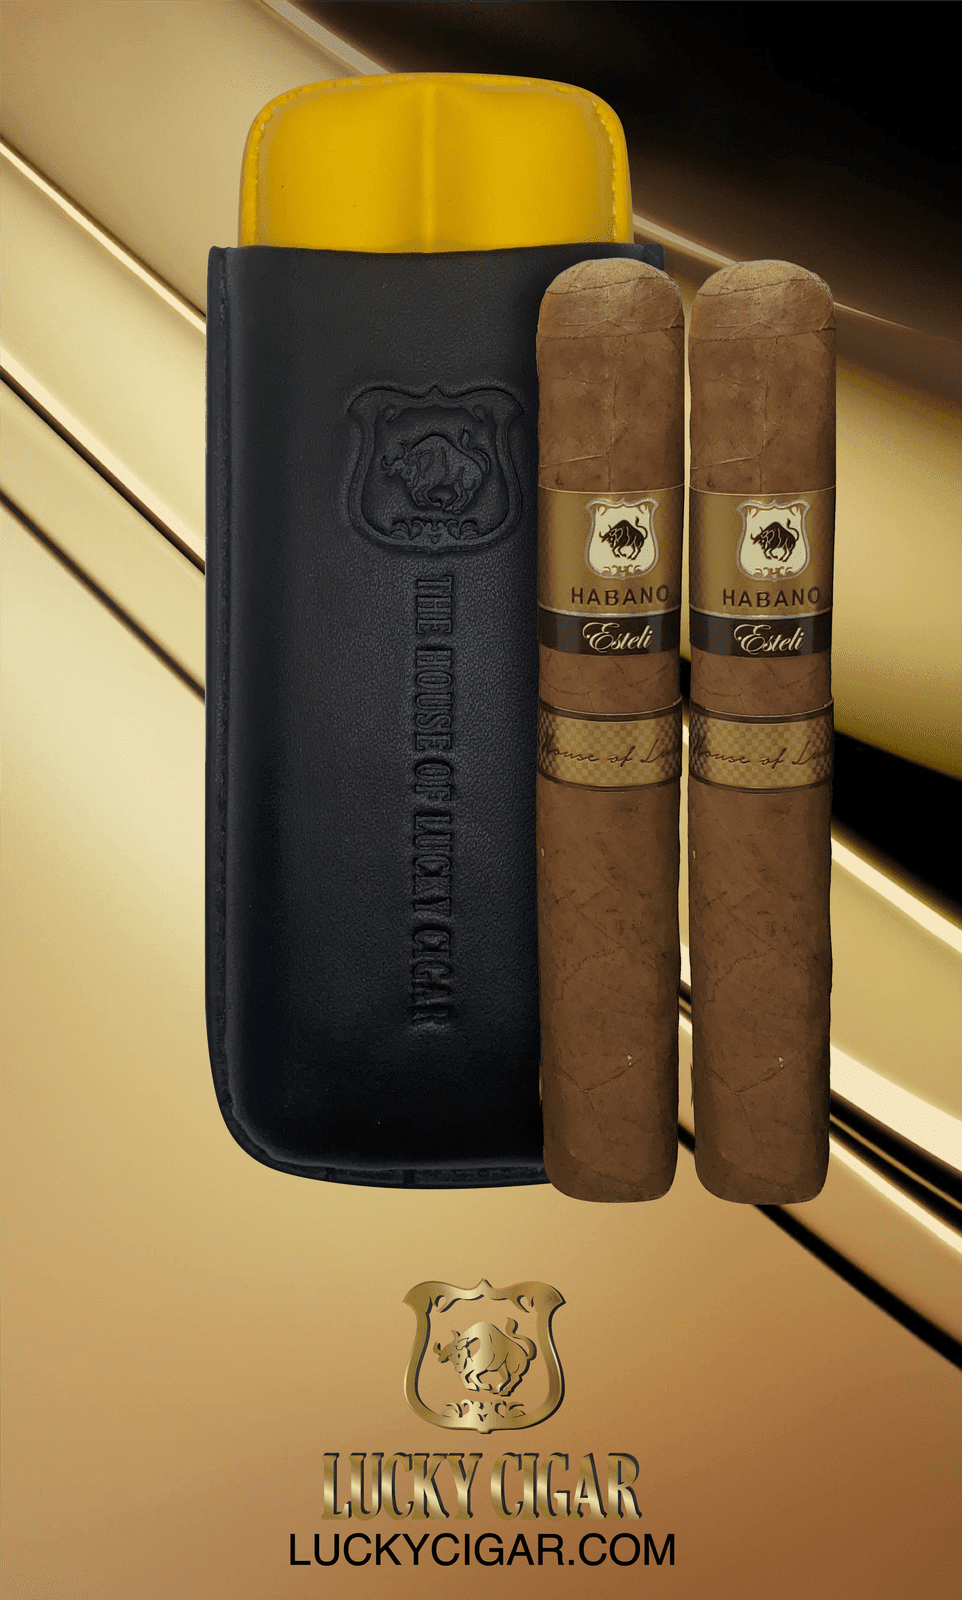 Cigar Lifestyle Accessories: Set of 2 Habano Cigars with Travel Humidor in Black/ Yellow Leather